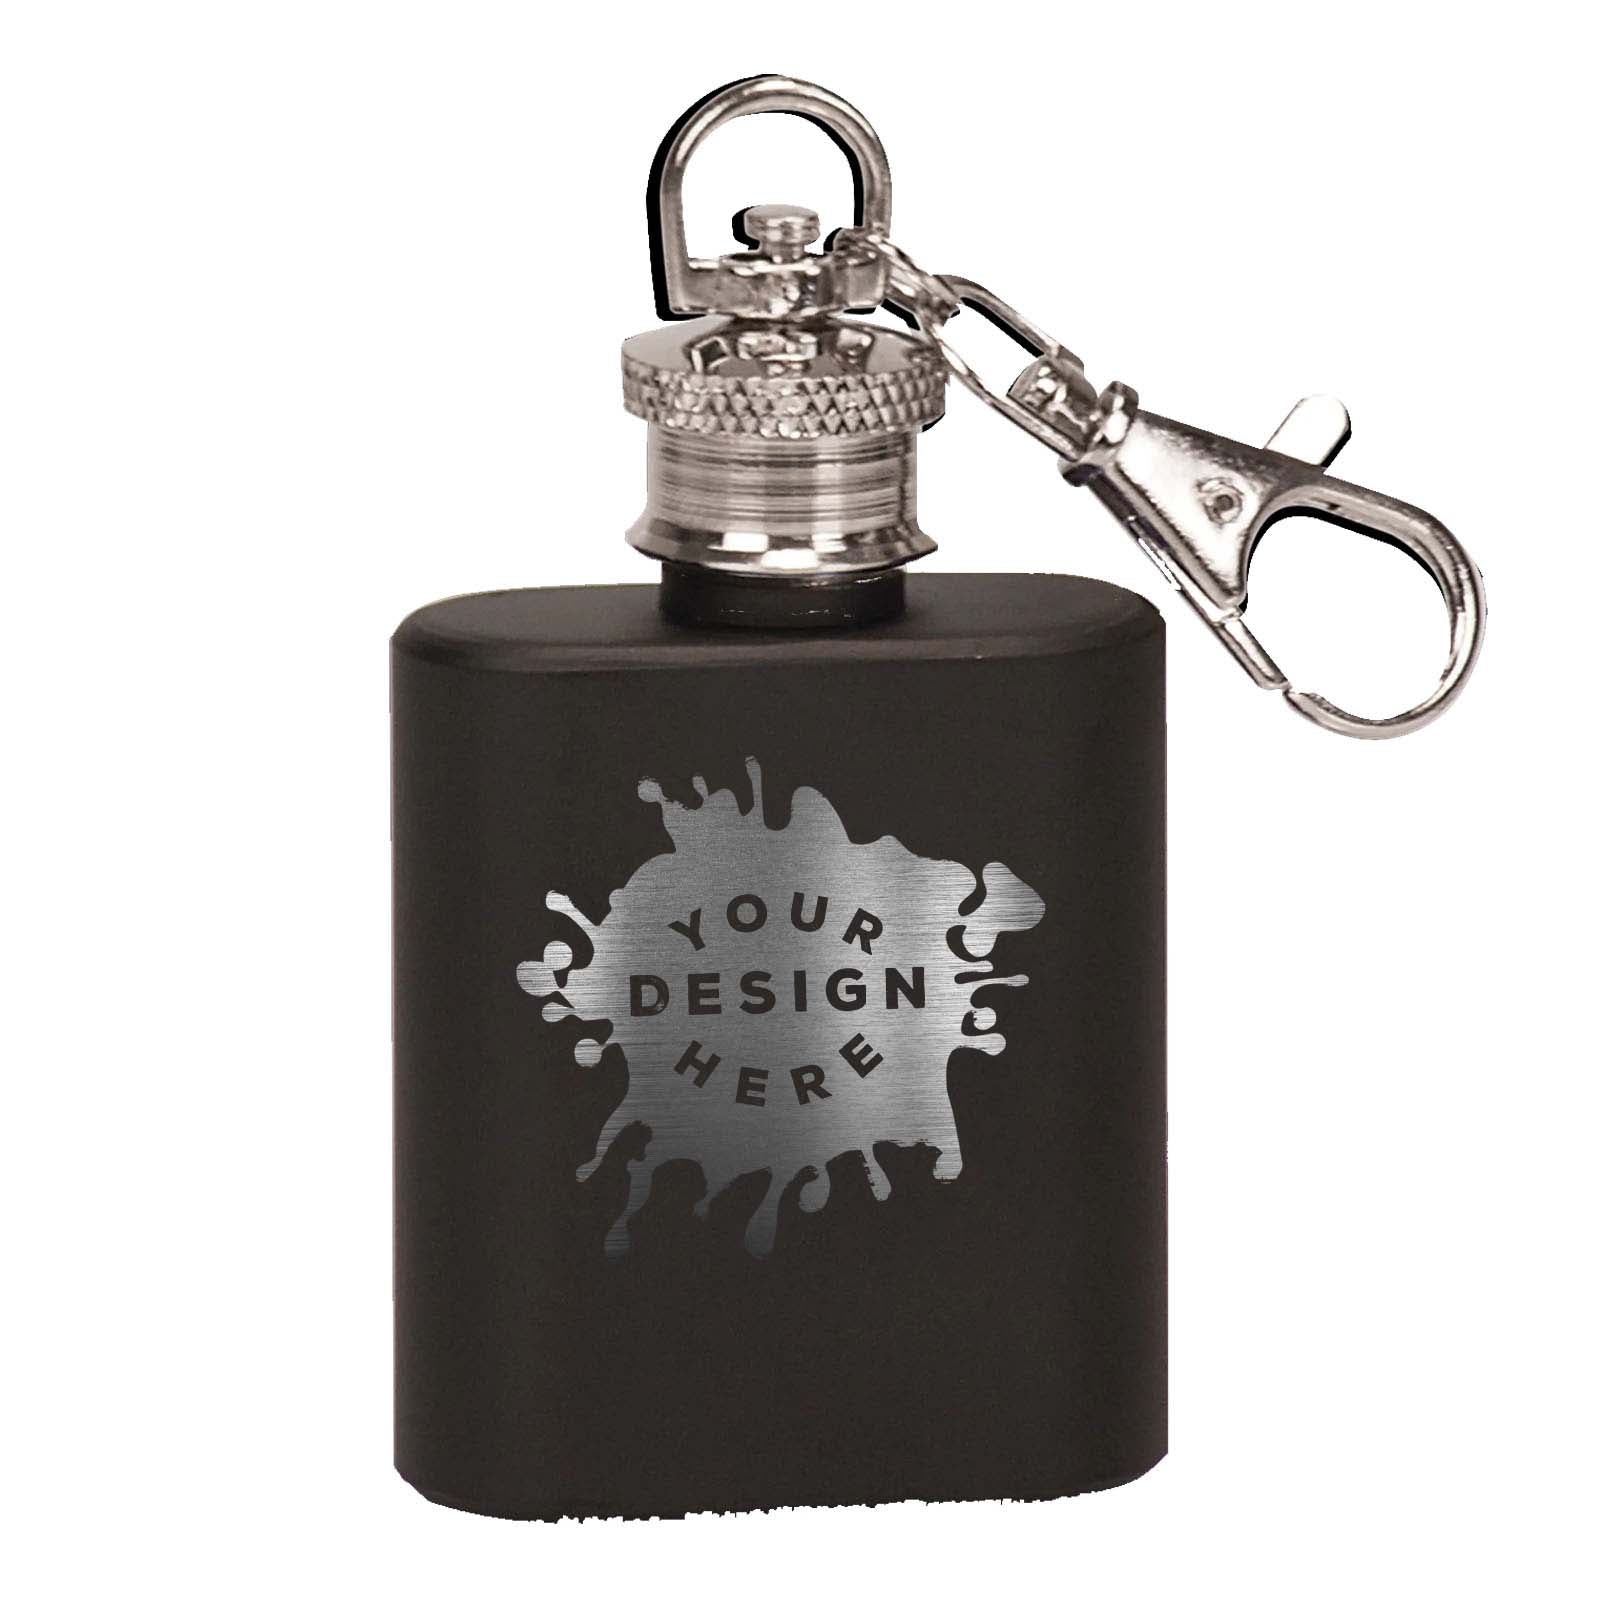 Custom Engraved Keychain Flasks - Five (5) Colors Available - Mato & Hash